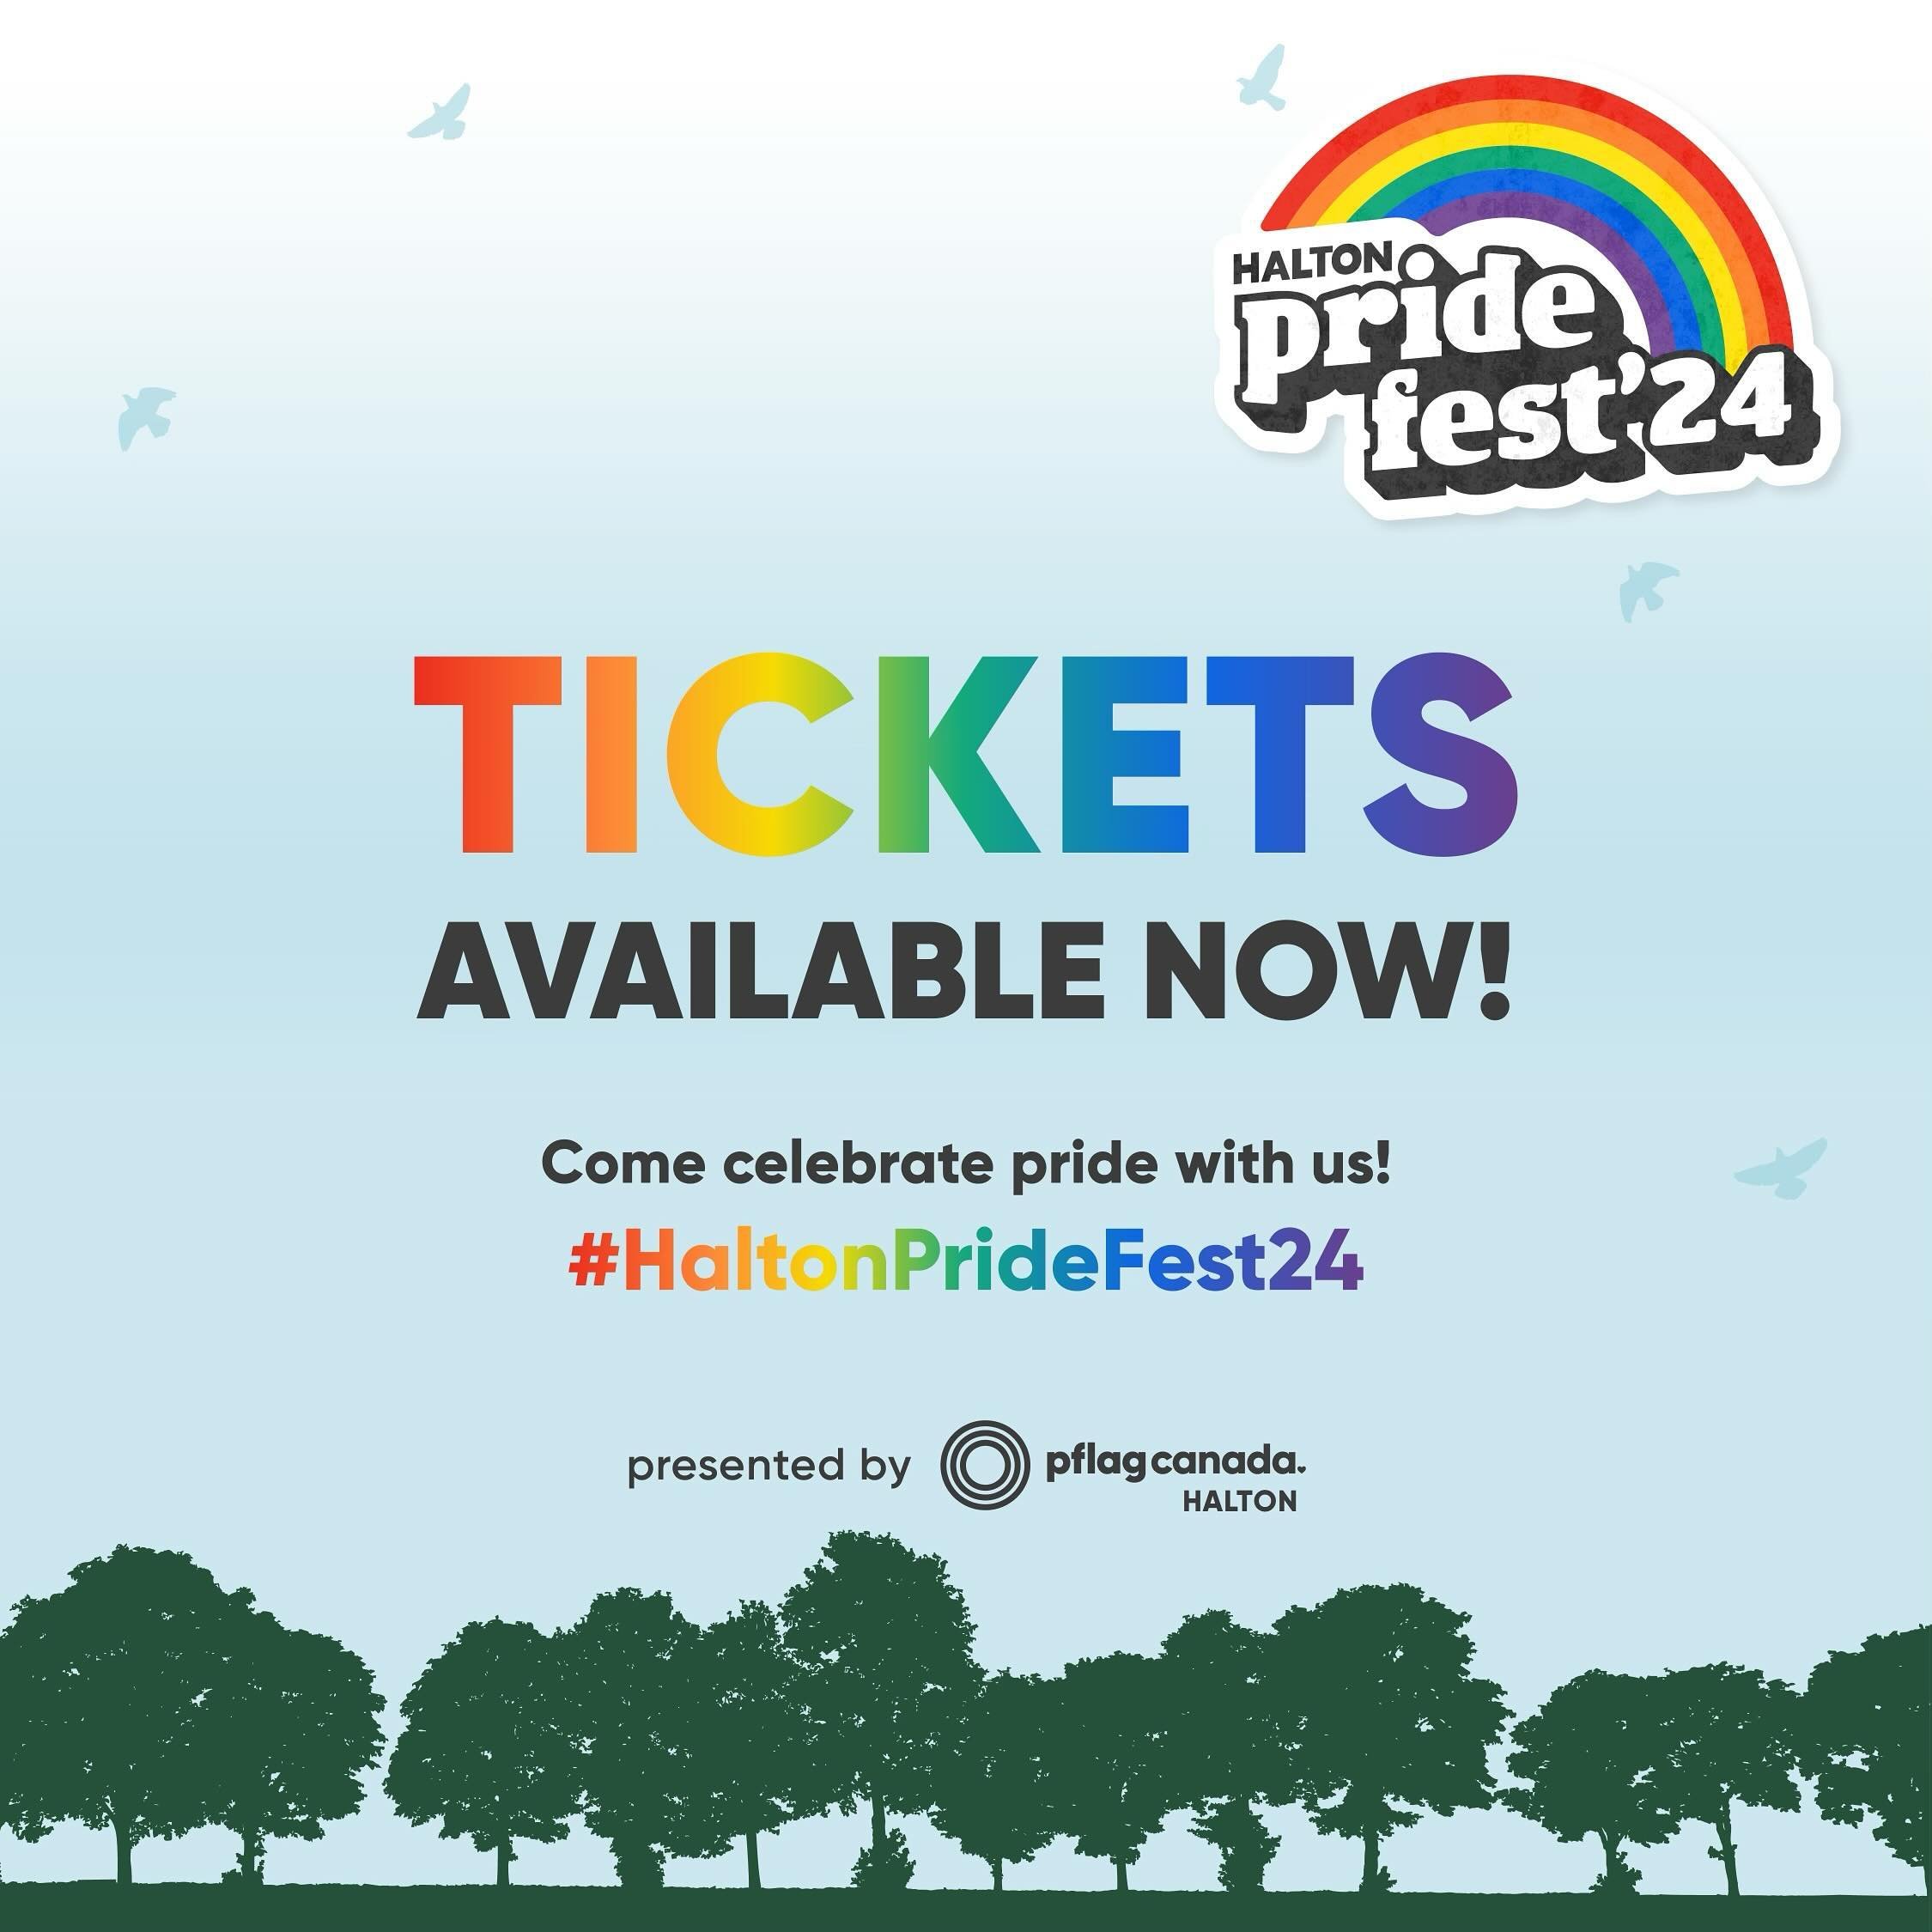 Tickets are now available for Halton Pride Fest&rsquo;24. 

General Admission is $10 and kids under 6 are free! You can also donate with a pay it forward ticket and we will give that ticket to a community member to attend HPF. If cost is a barrier fo